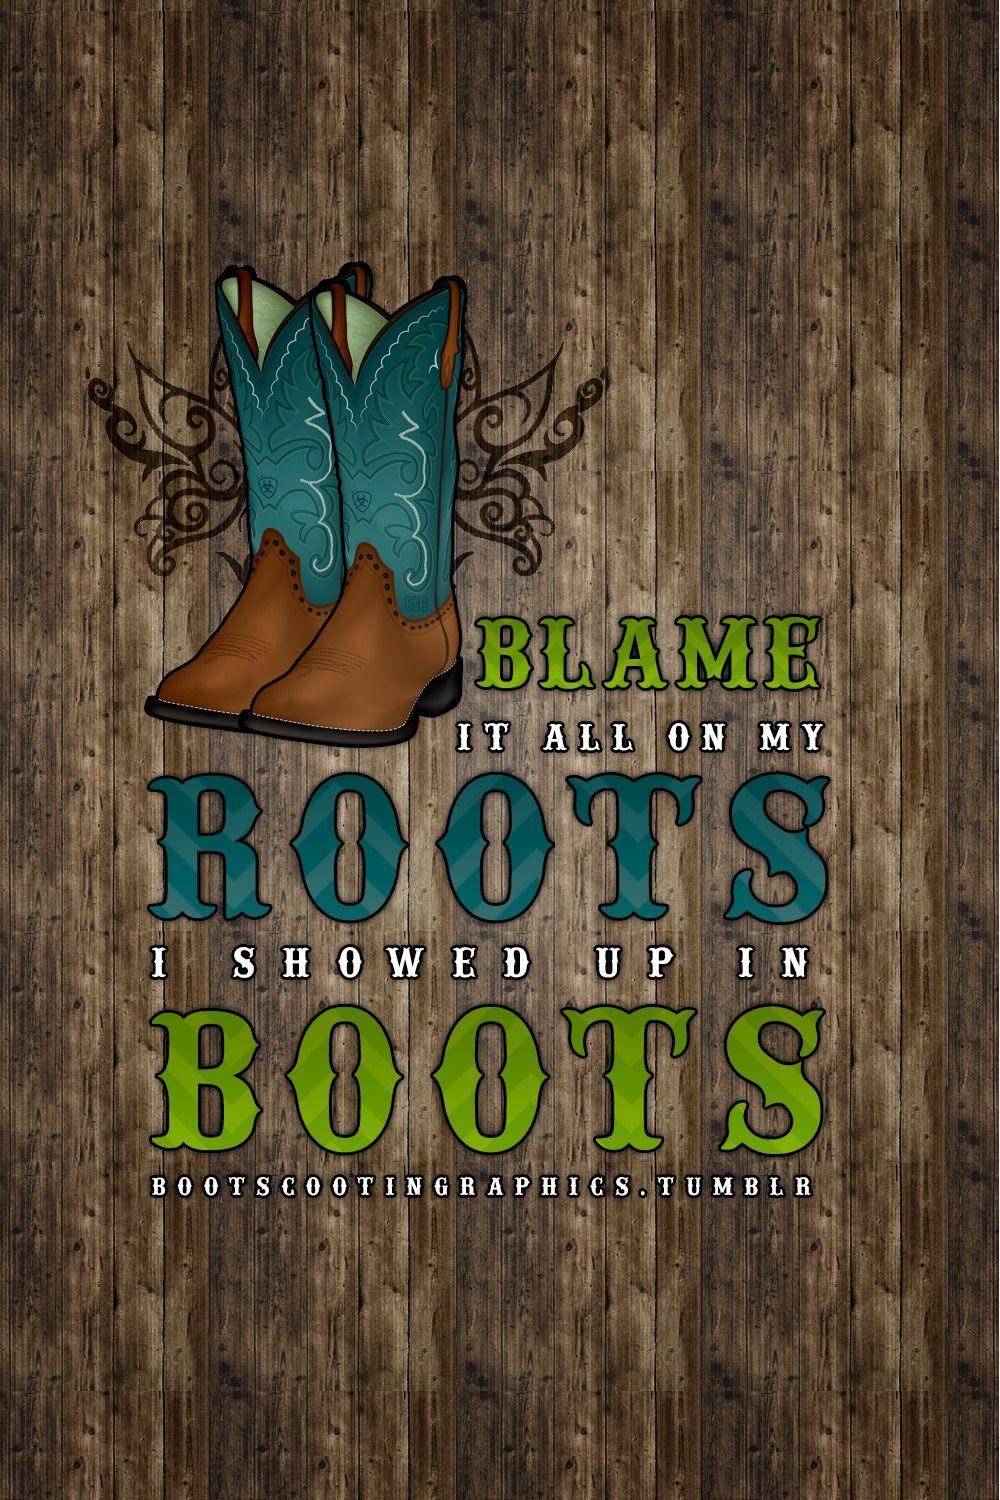 Boot Scootin' Graphics. Country girl quotes, Country music quotes